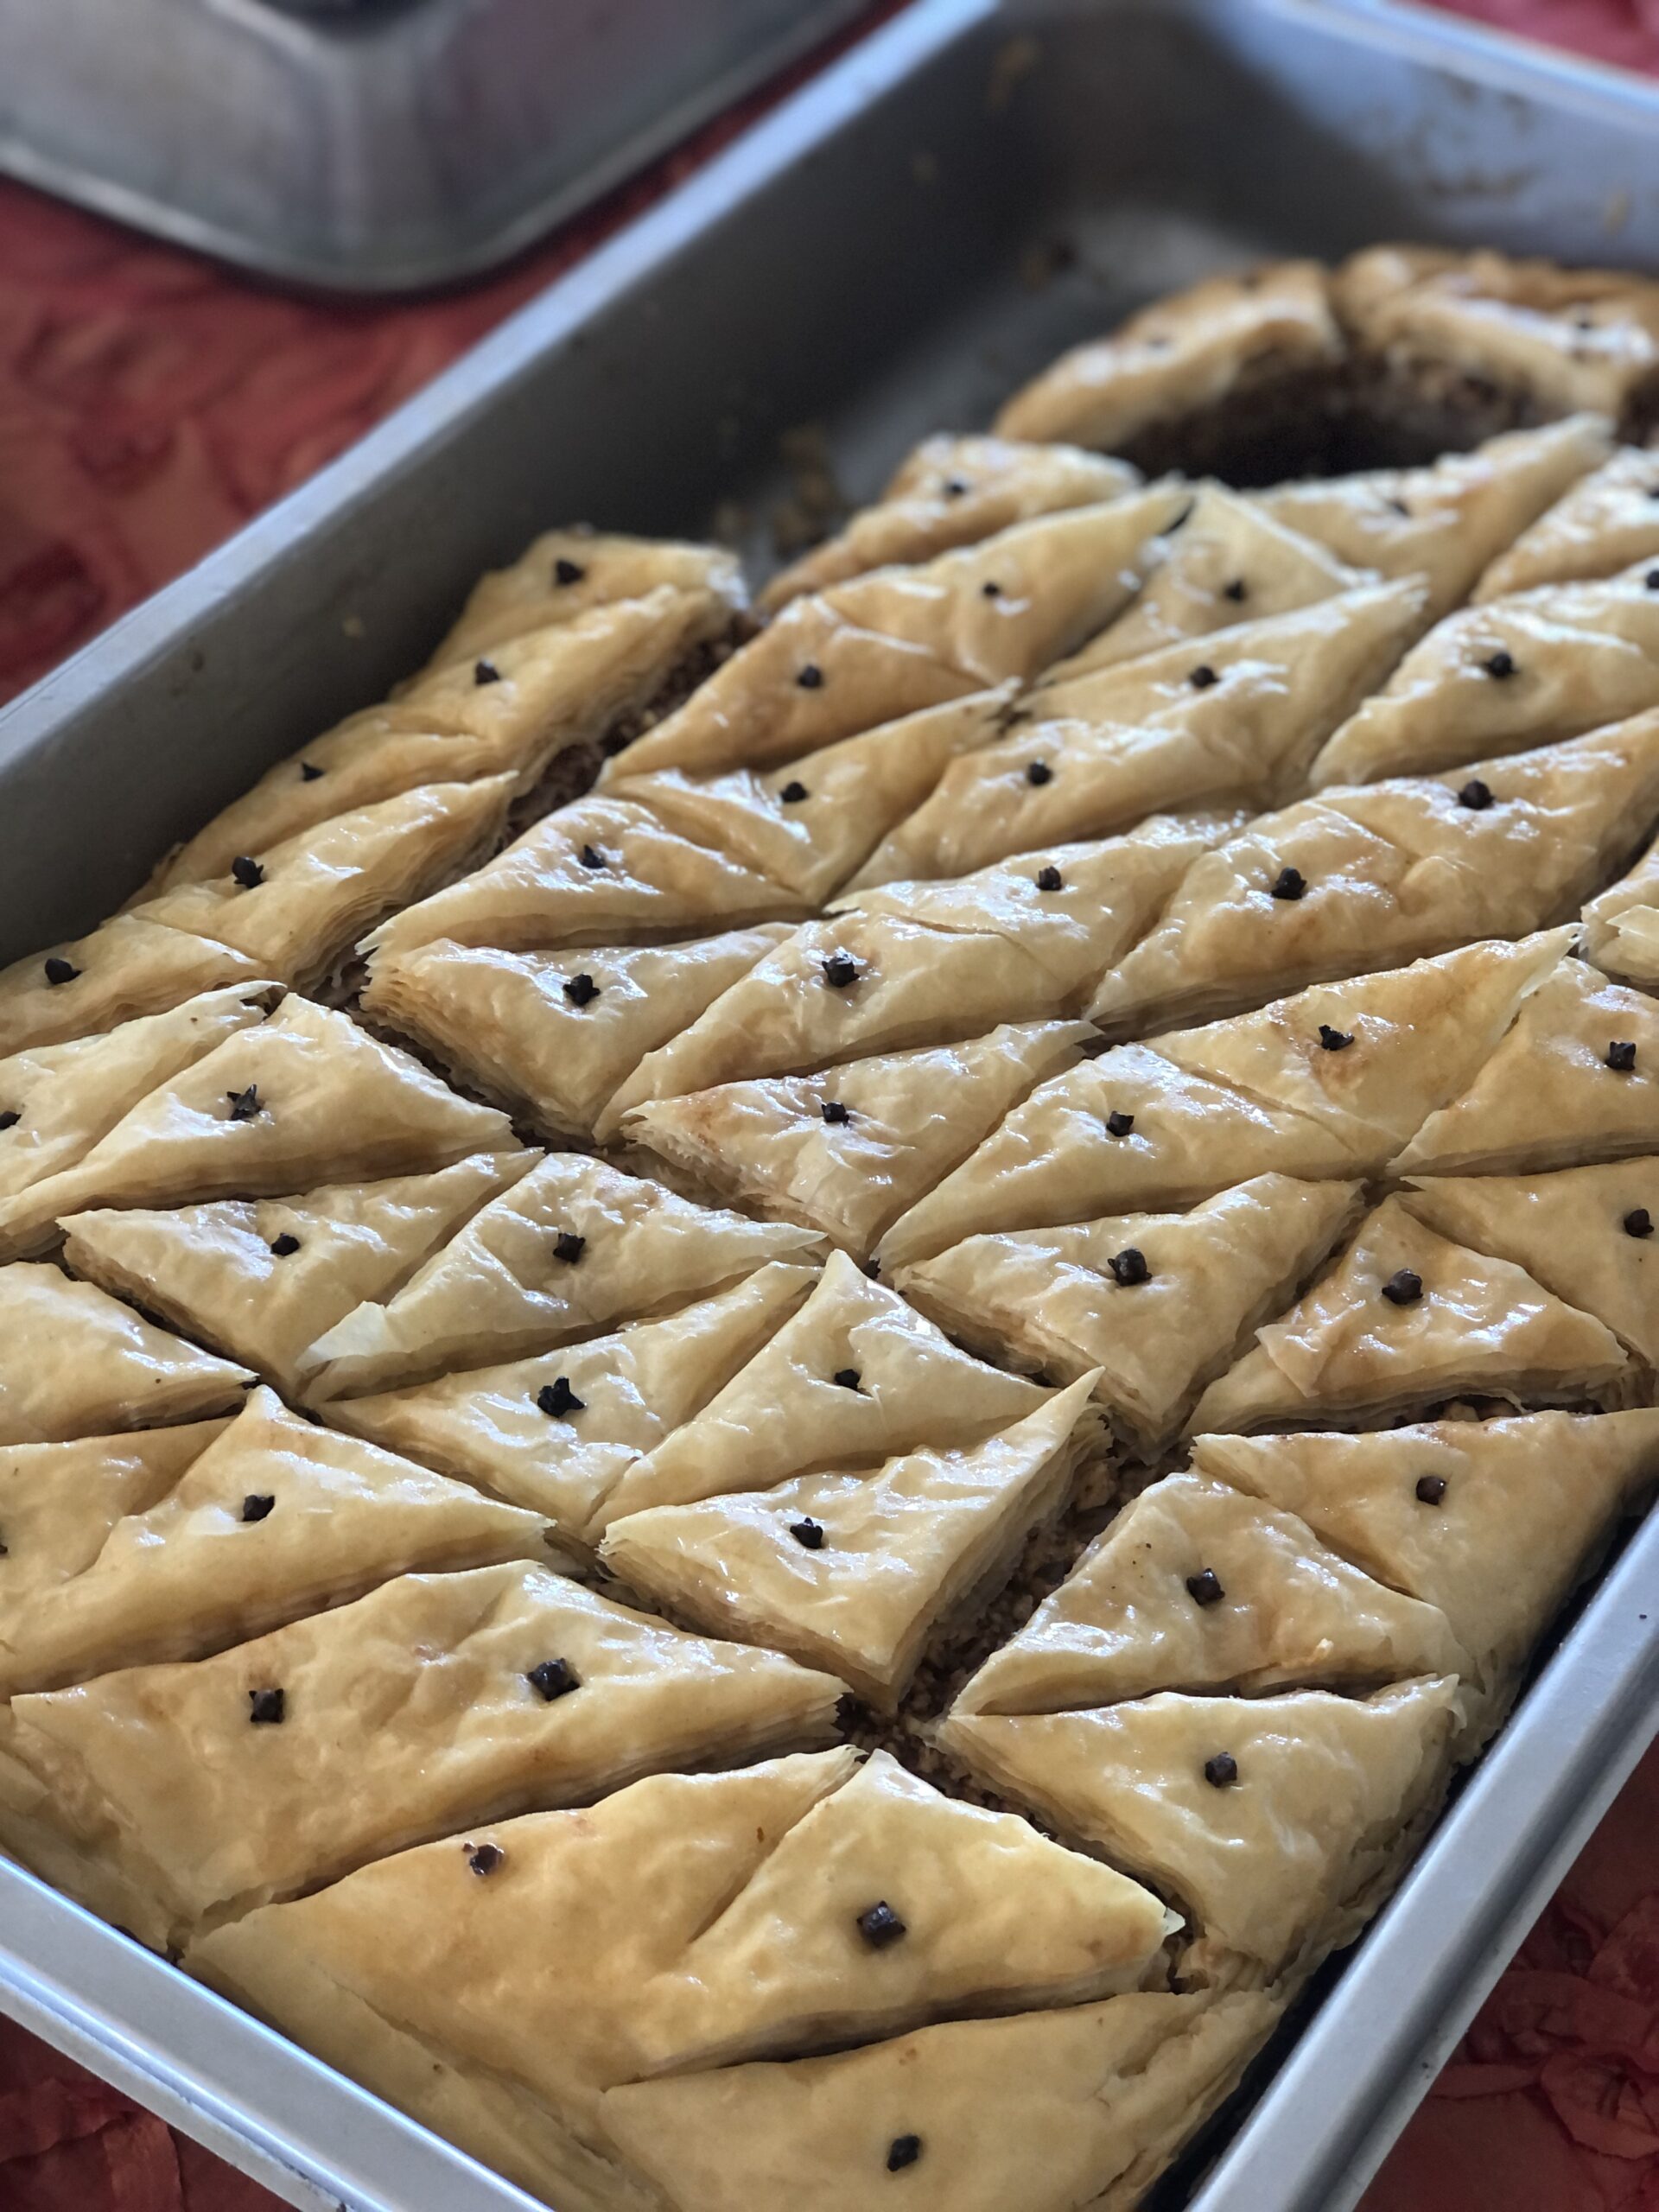 A tray of freshly made baklava, made with walnuts and phyllo pastry. CAILIN RILEY